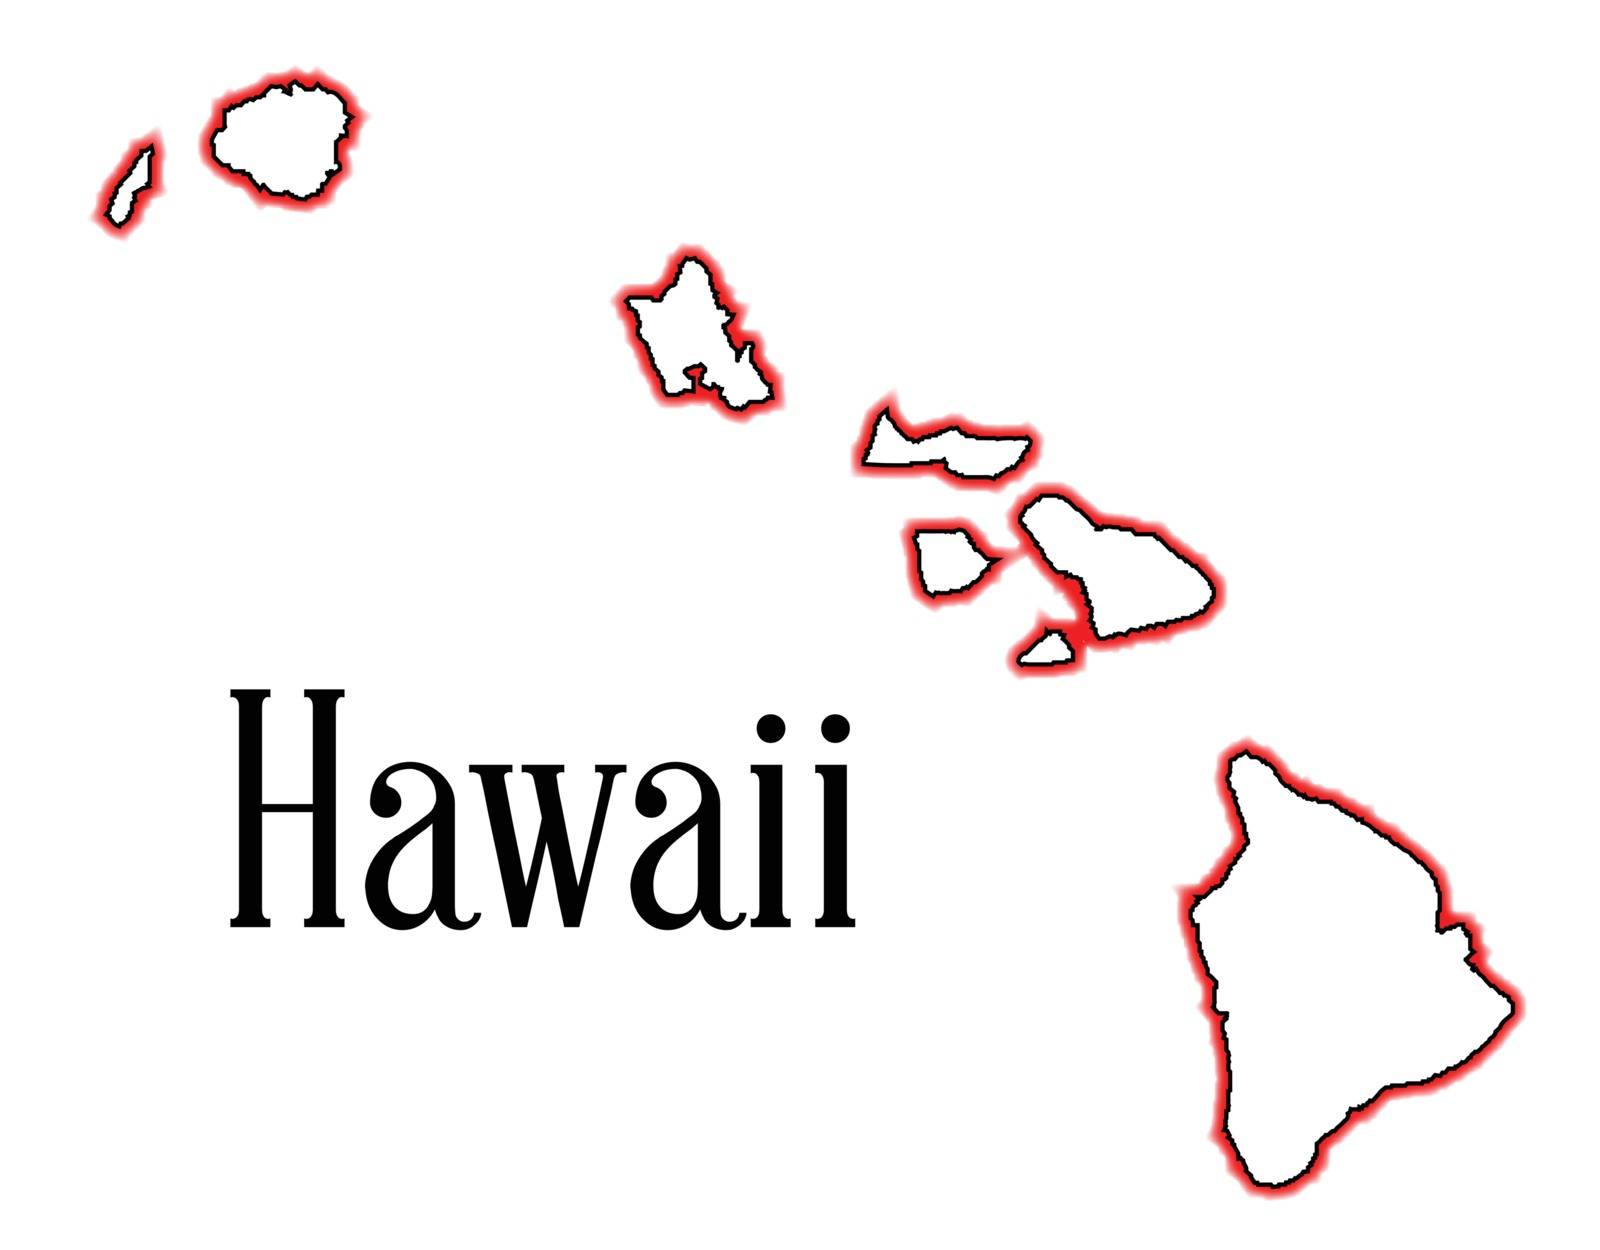 Outline map of the islands of Hawaii over a white background